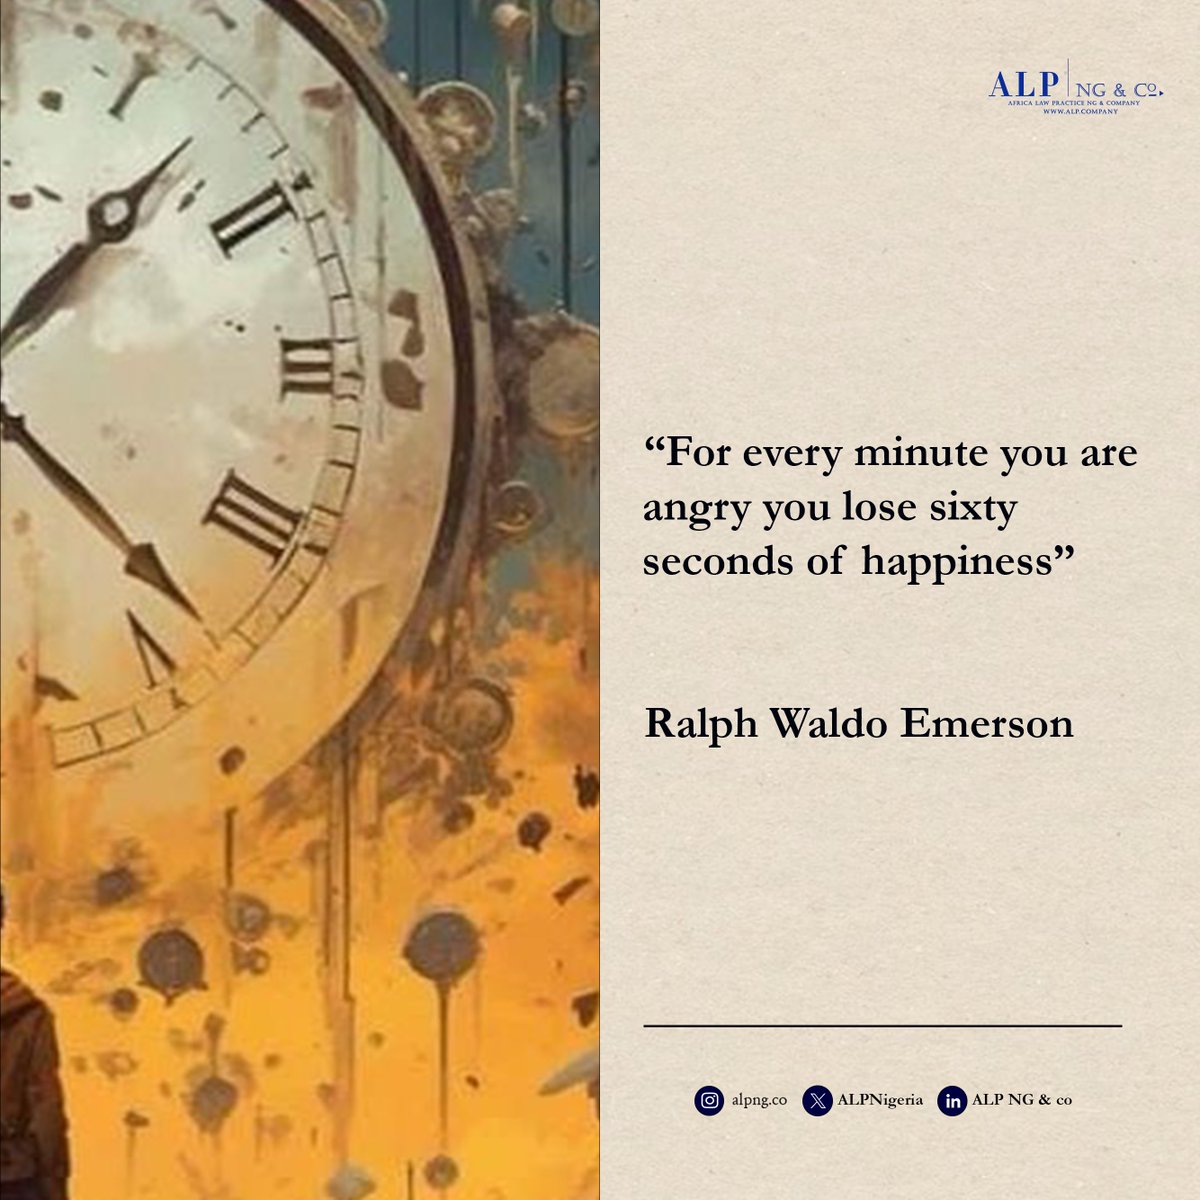 Be happy, one minute at a time. Happy New Week!!

#ALPNG #AdjustingTheSails #Happiness #Choice #PositiveMindset #PositiveThoughts #BoldWeek #Believe #Goals #MondayMotivation #Newweek #SuccessMindset #Onefirm #MondayQuote